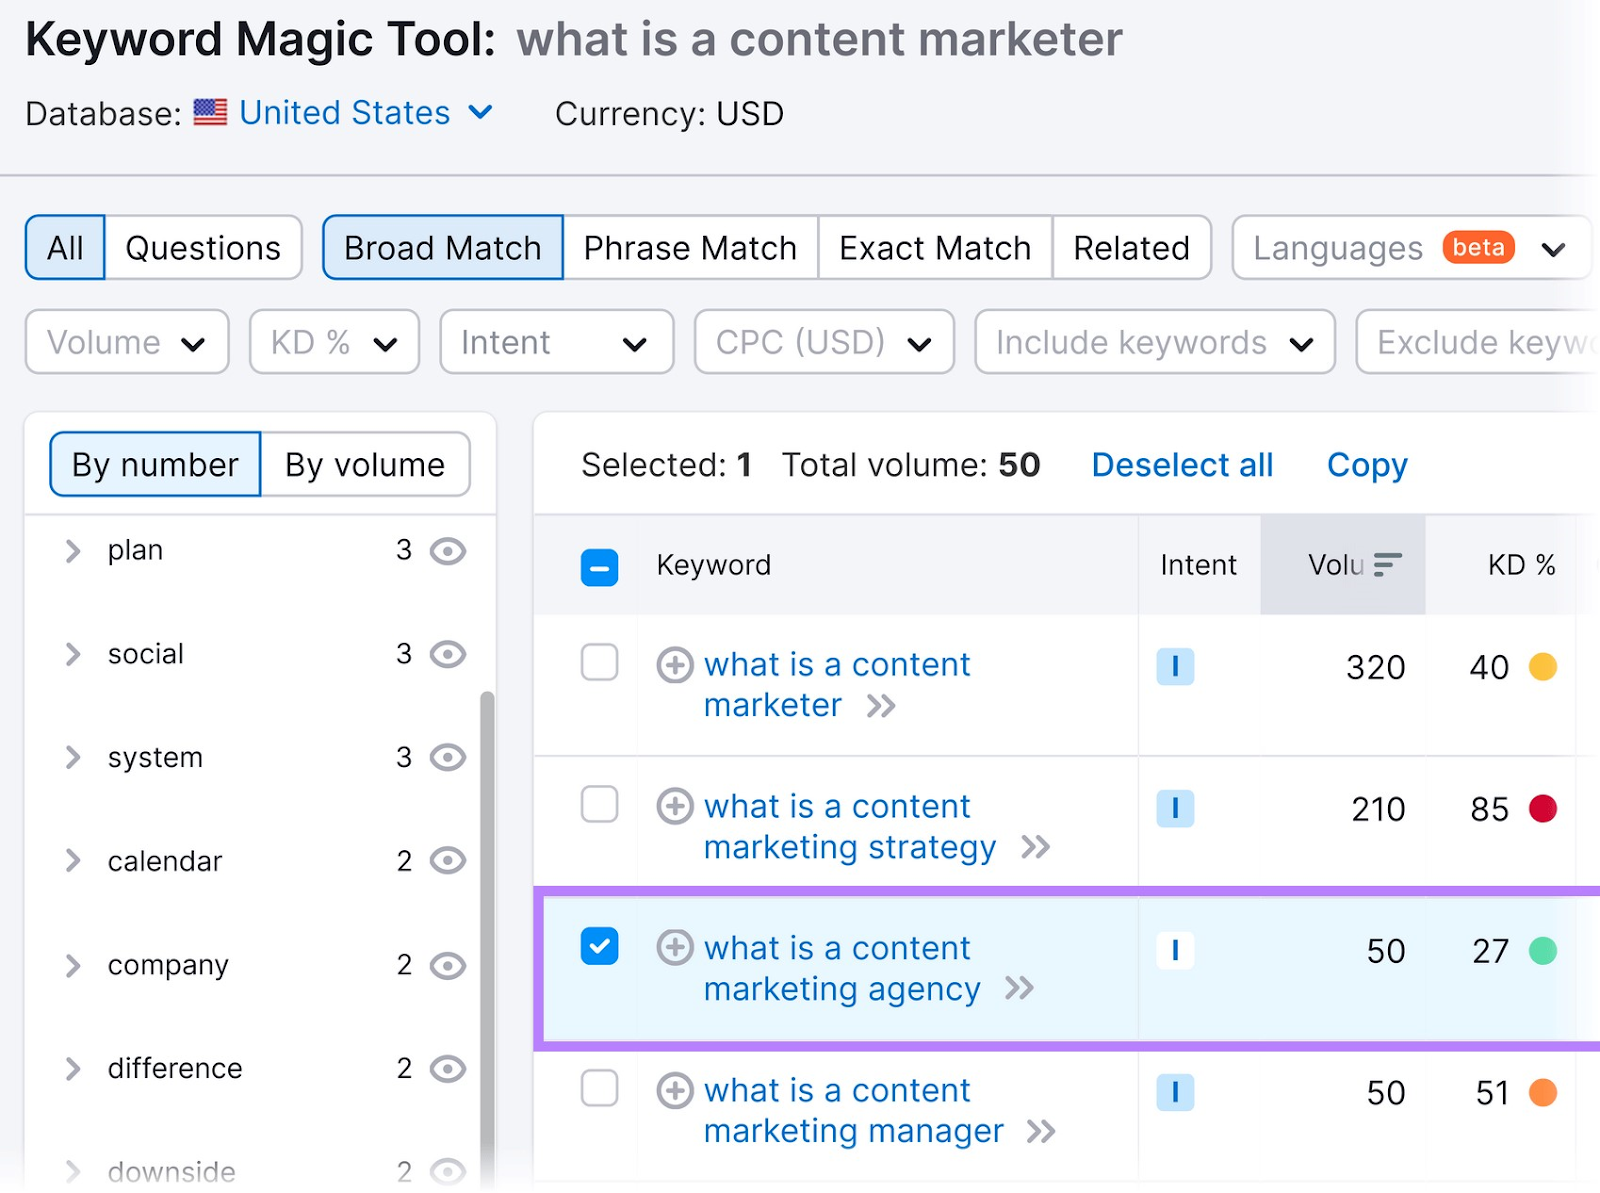 Keyword Magic Tool results for “what is a content marketer” keyword